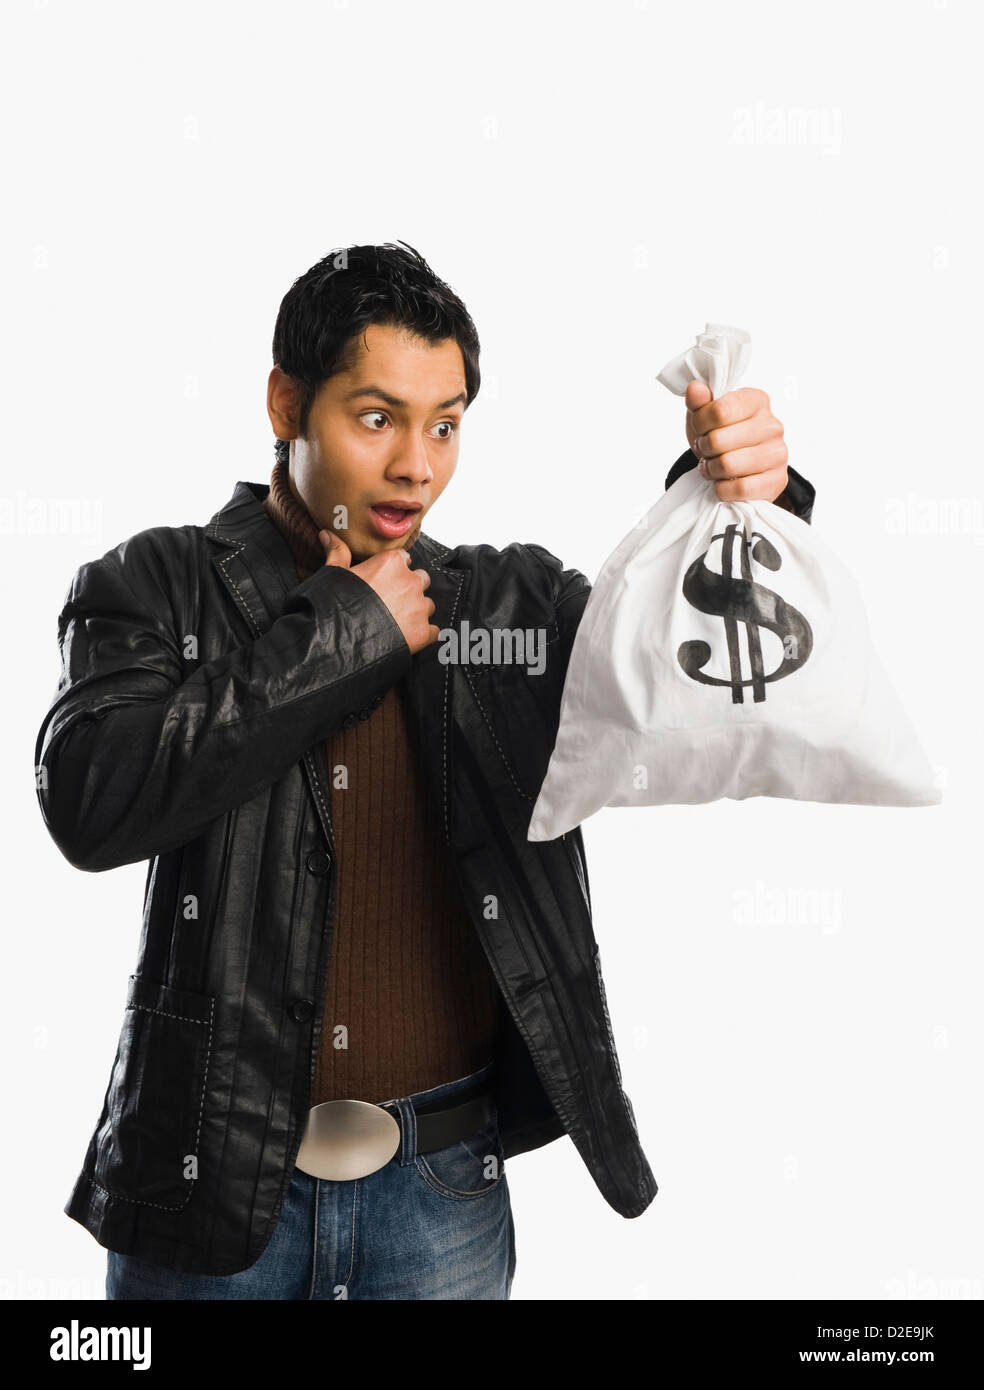 Man holding a money bag and looking surprised Stock Photo